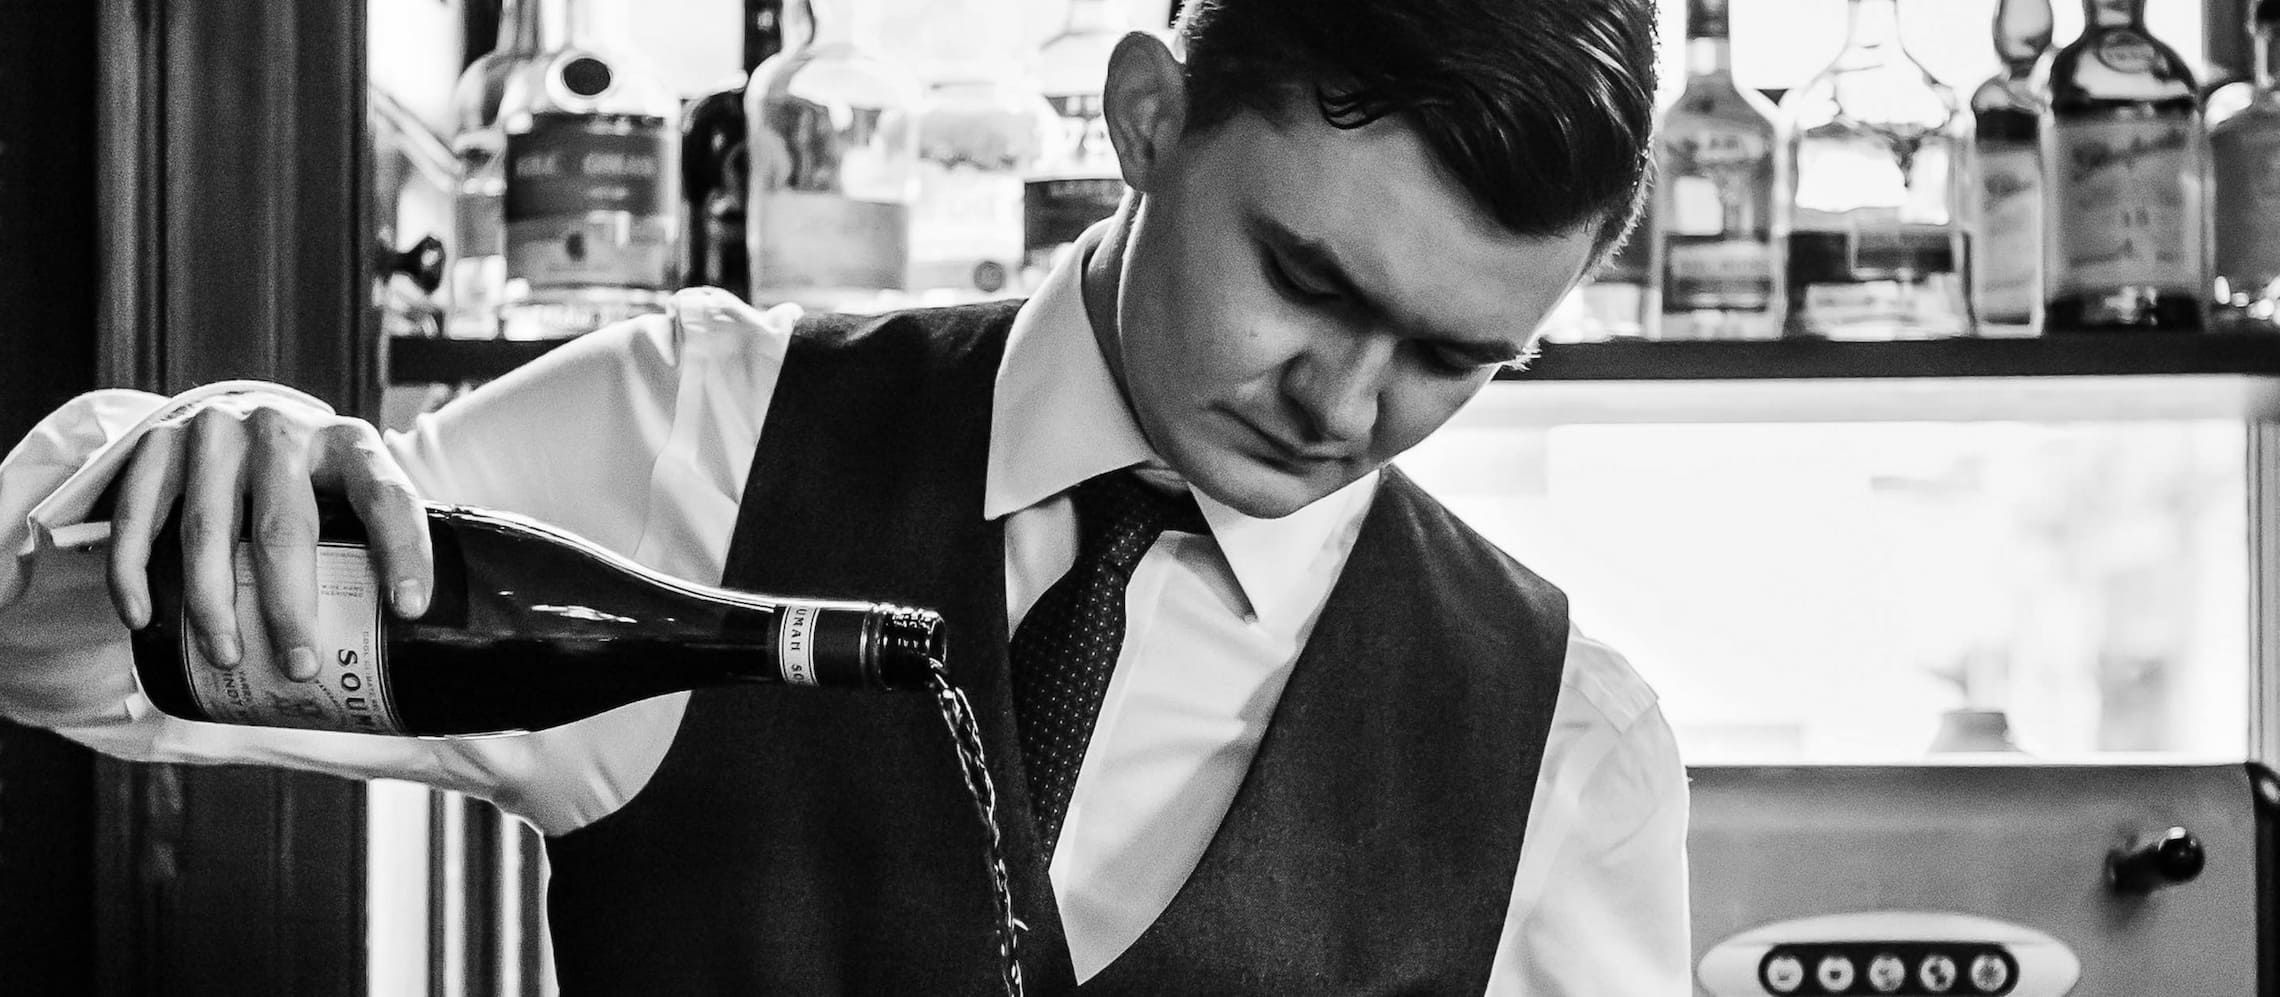 Photo for: Interviewing a Sommelier: Jack Dickinson, Mark Greenaway